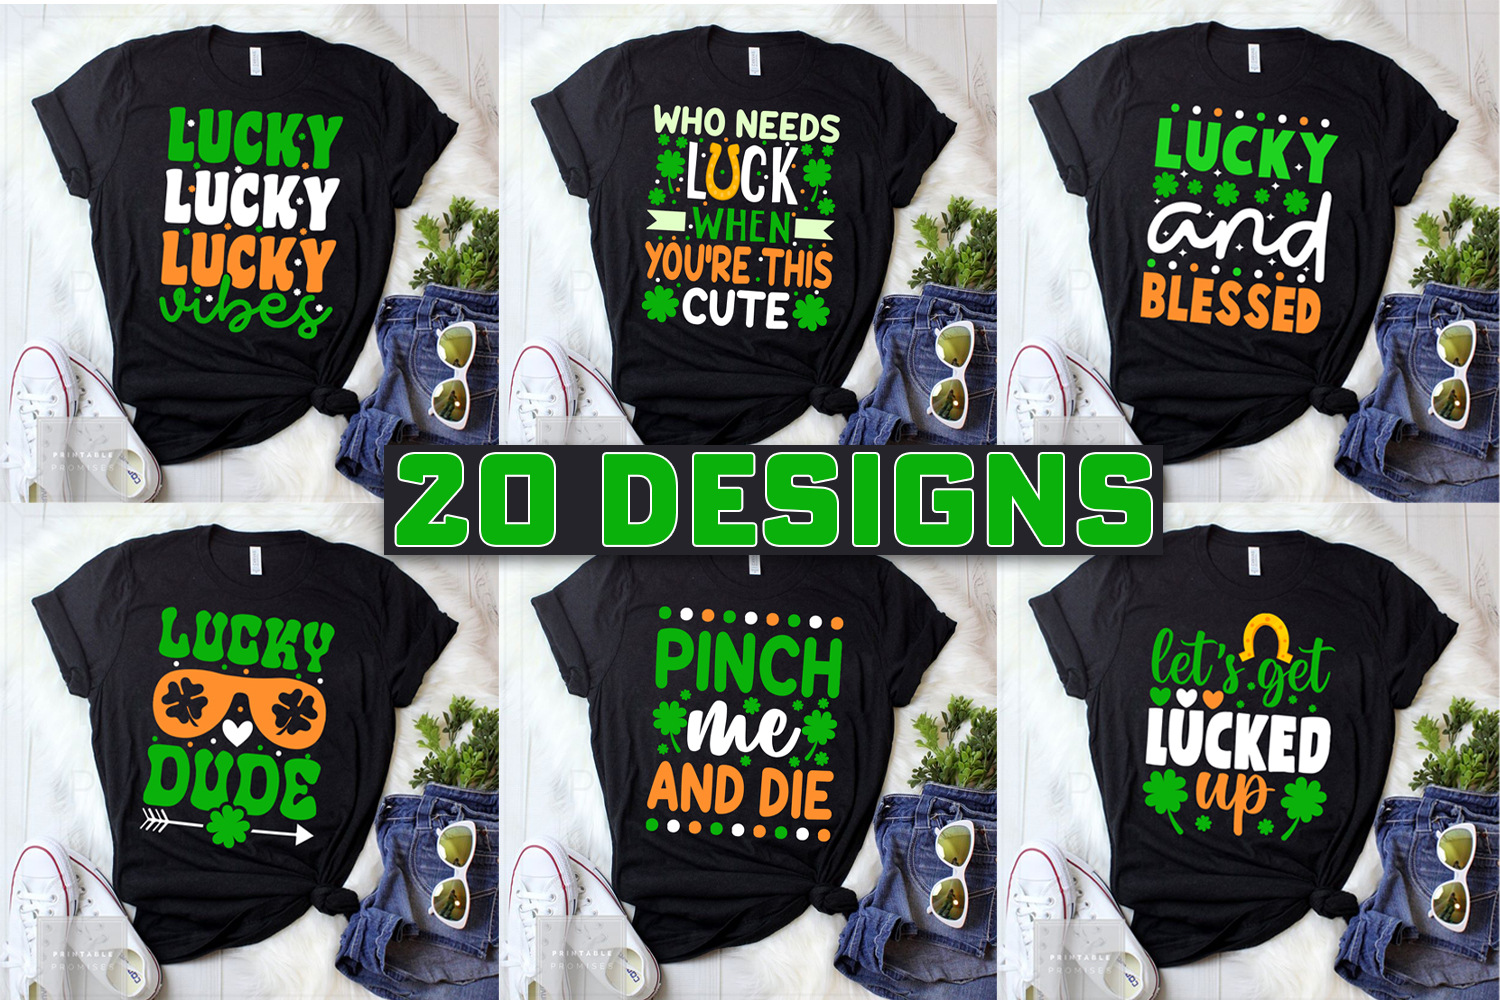 Bunch of shirts that say lucky lucky lucky lucky lucky lucky lucky lucky lucky lucky.